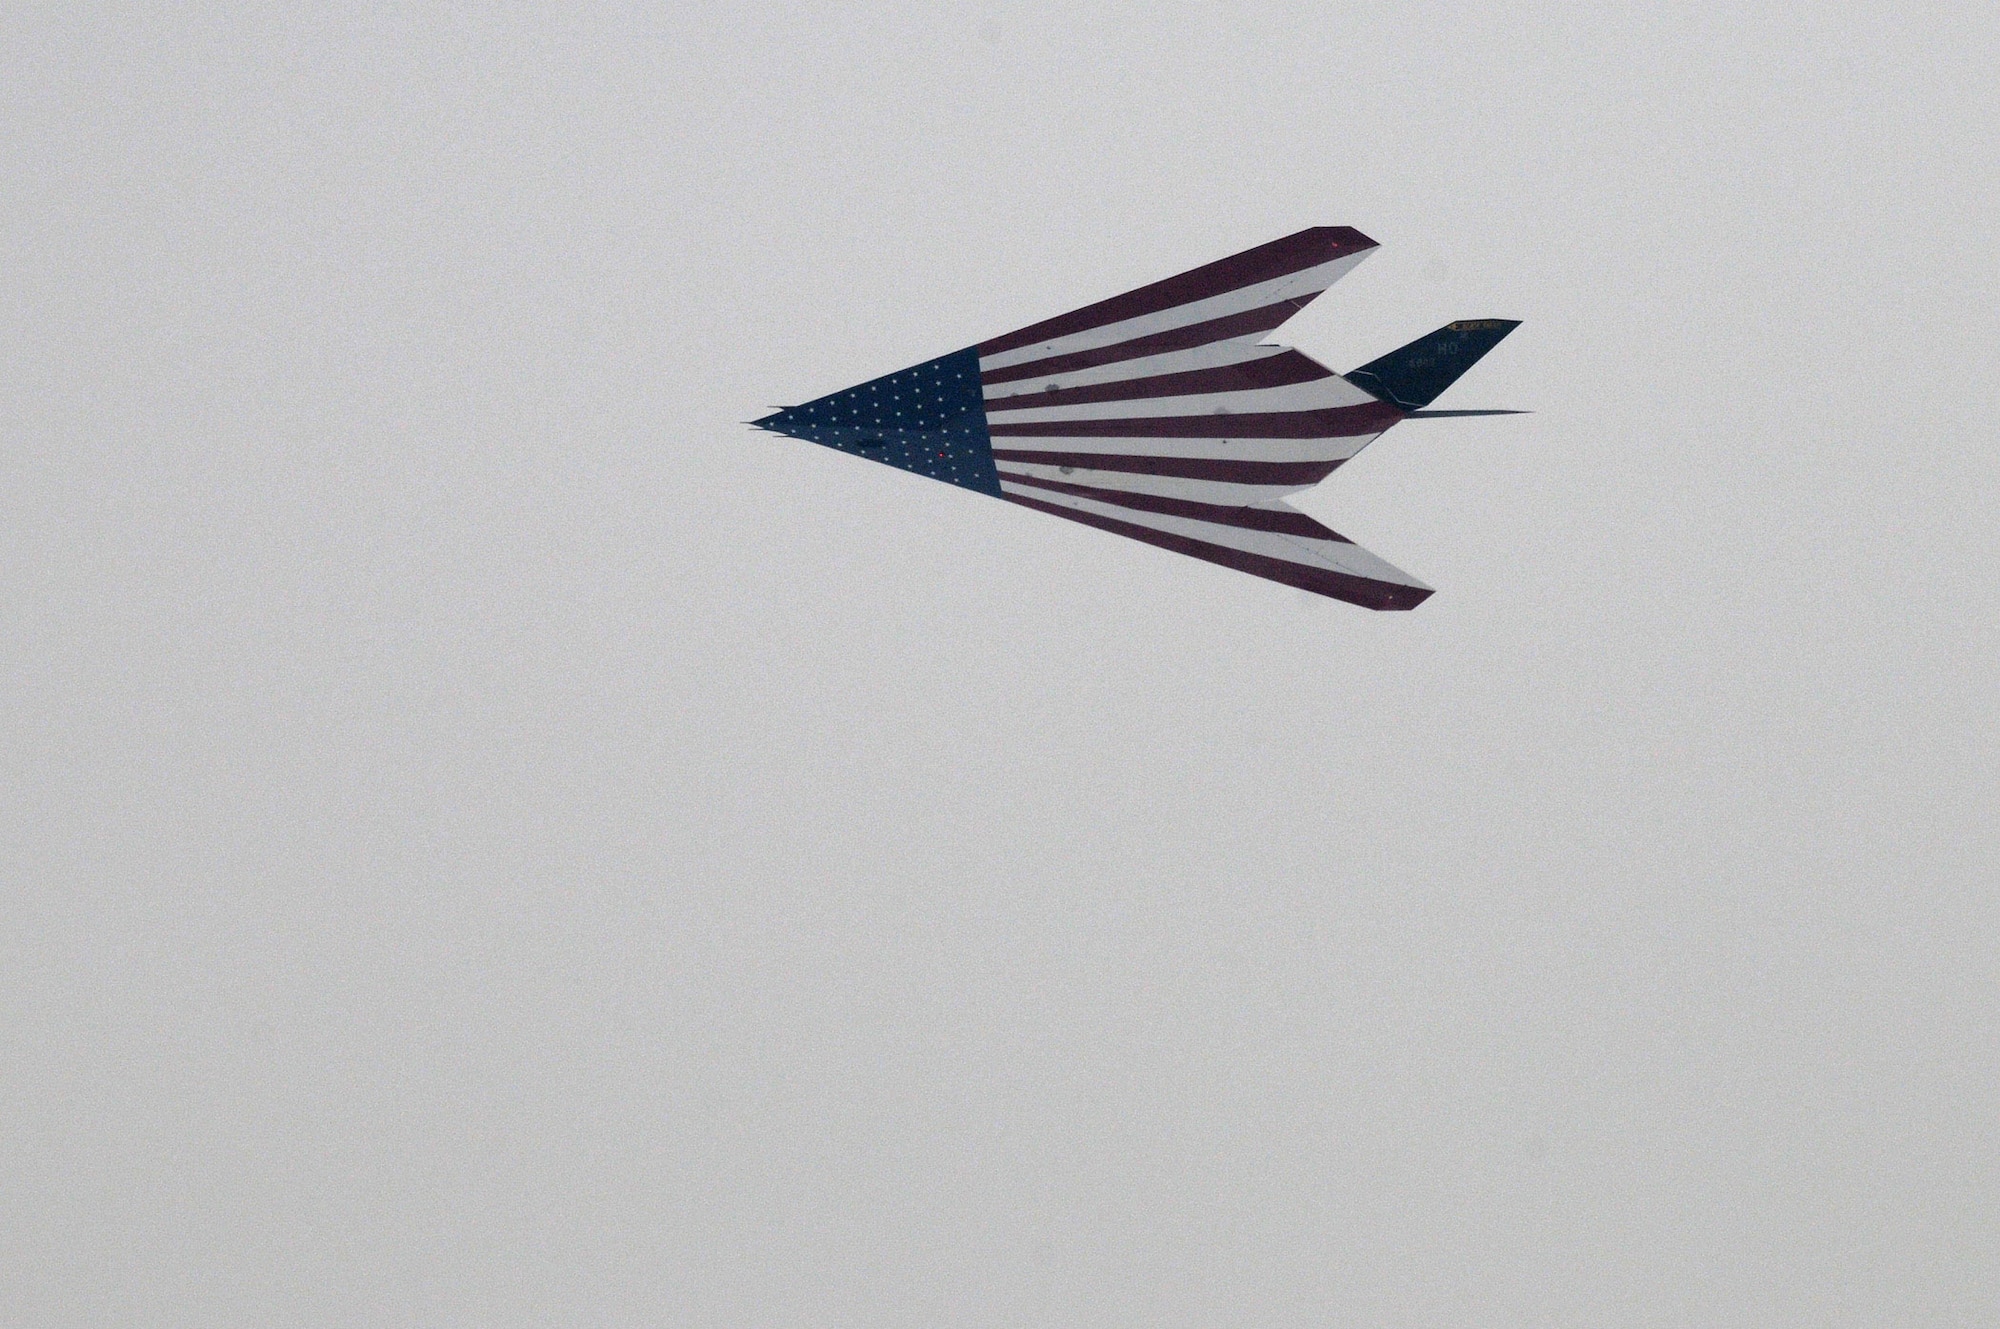 An F-117 Nighthawk performs a flyover through the fog during the conclusion of the F-117 Nighthawk farewell ceremony at Wright-Patterson Air Force Base, Ohio, March 11.  (U.S. Air Force photo/Staff Sgt Joshua Strang)
